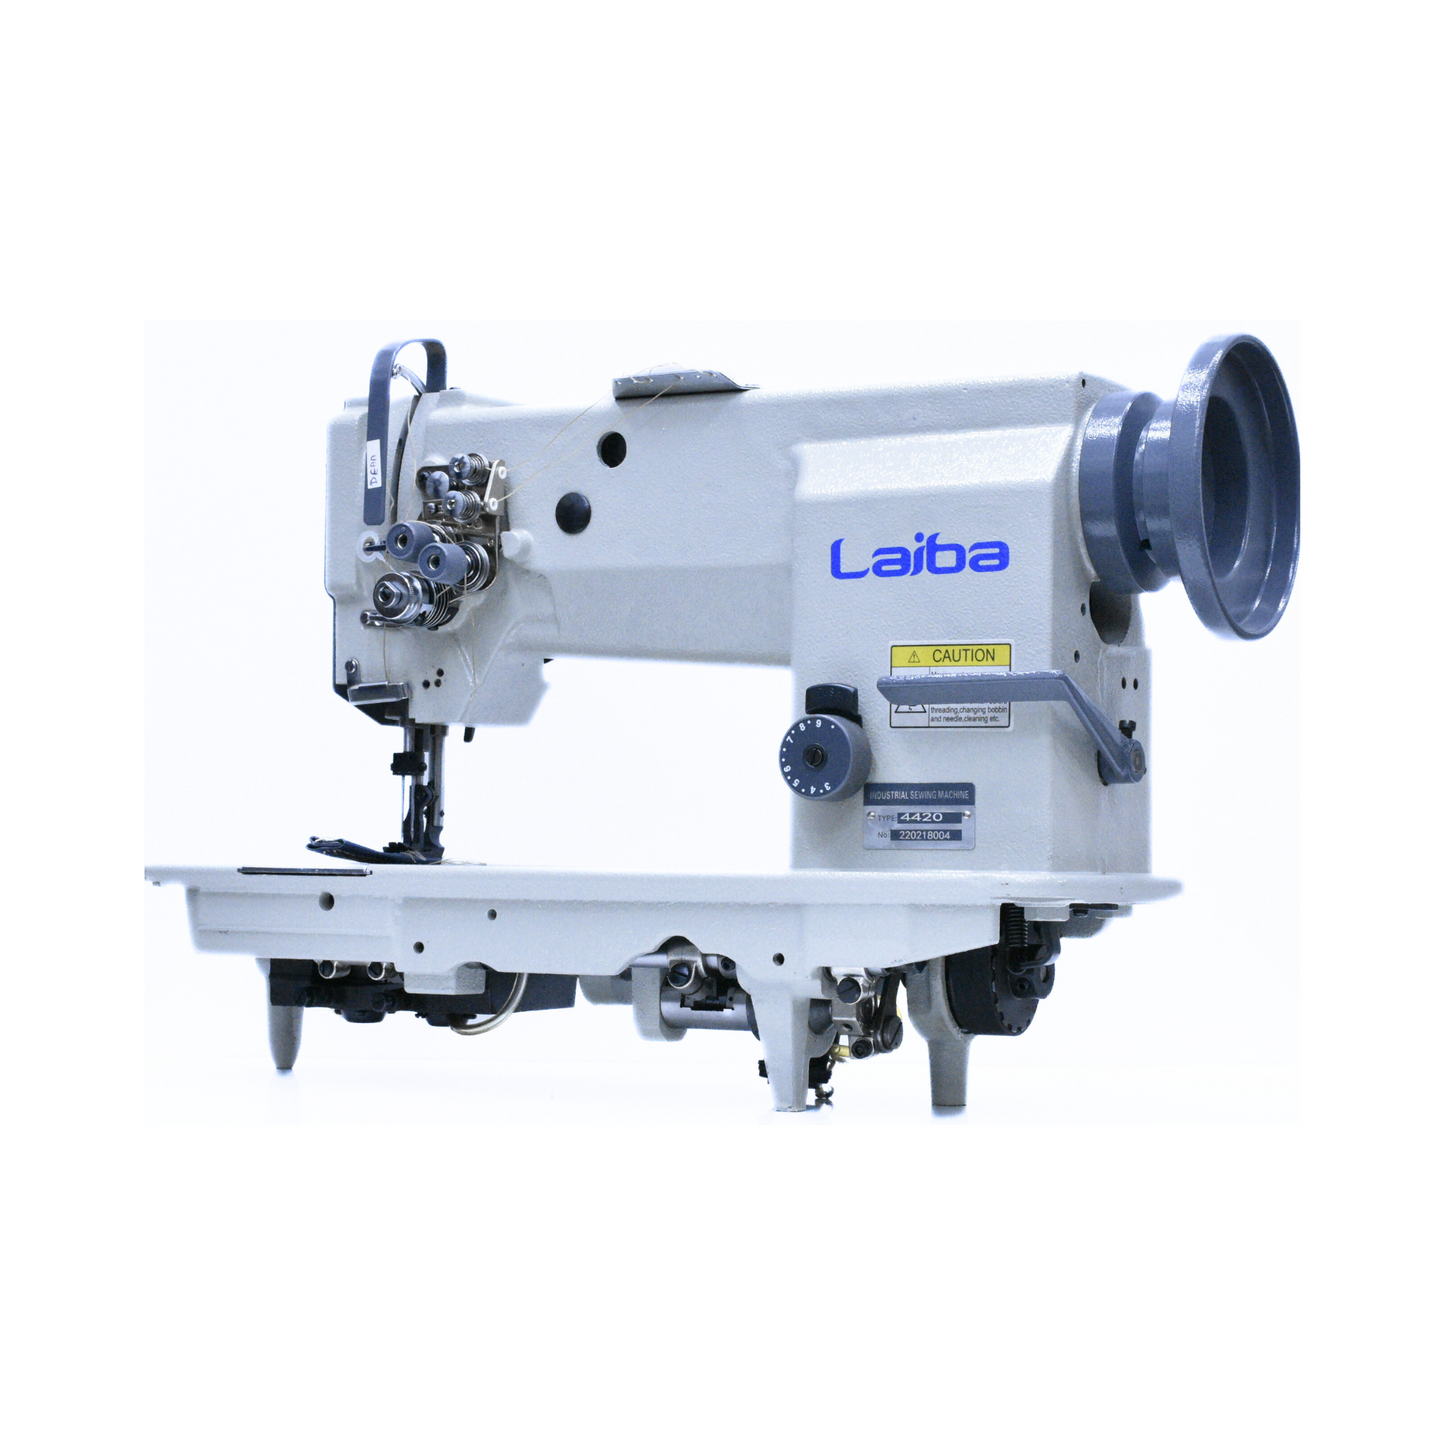 Laiba 4420 double needle industrial sewing machine